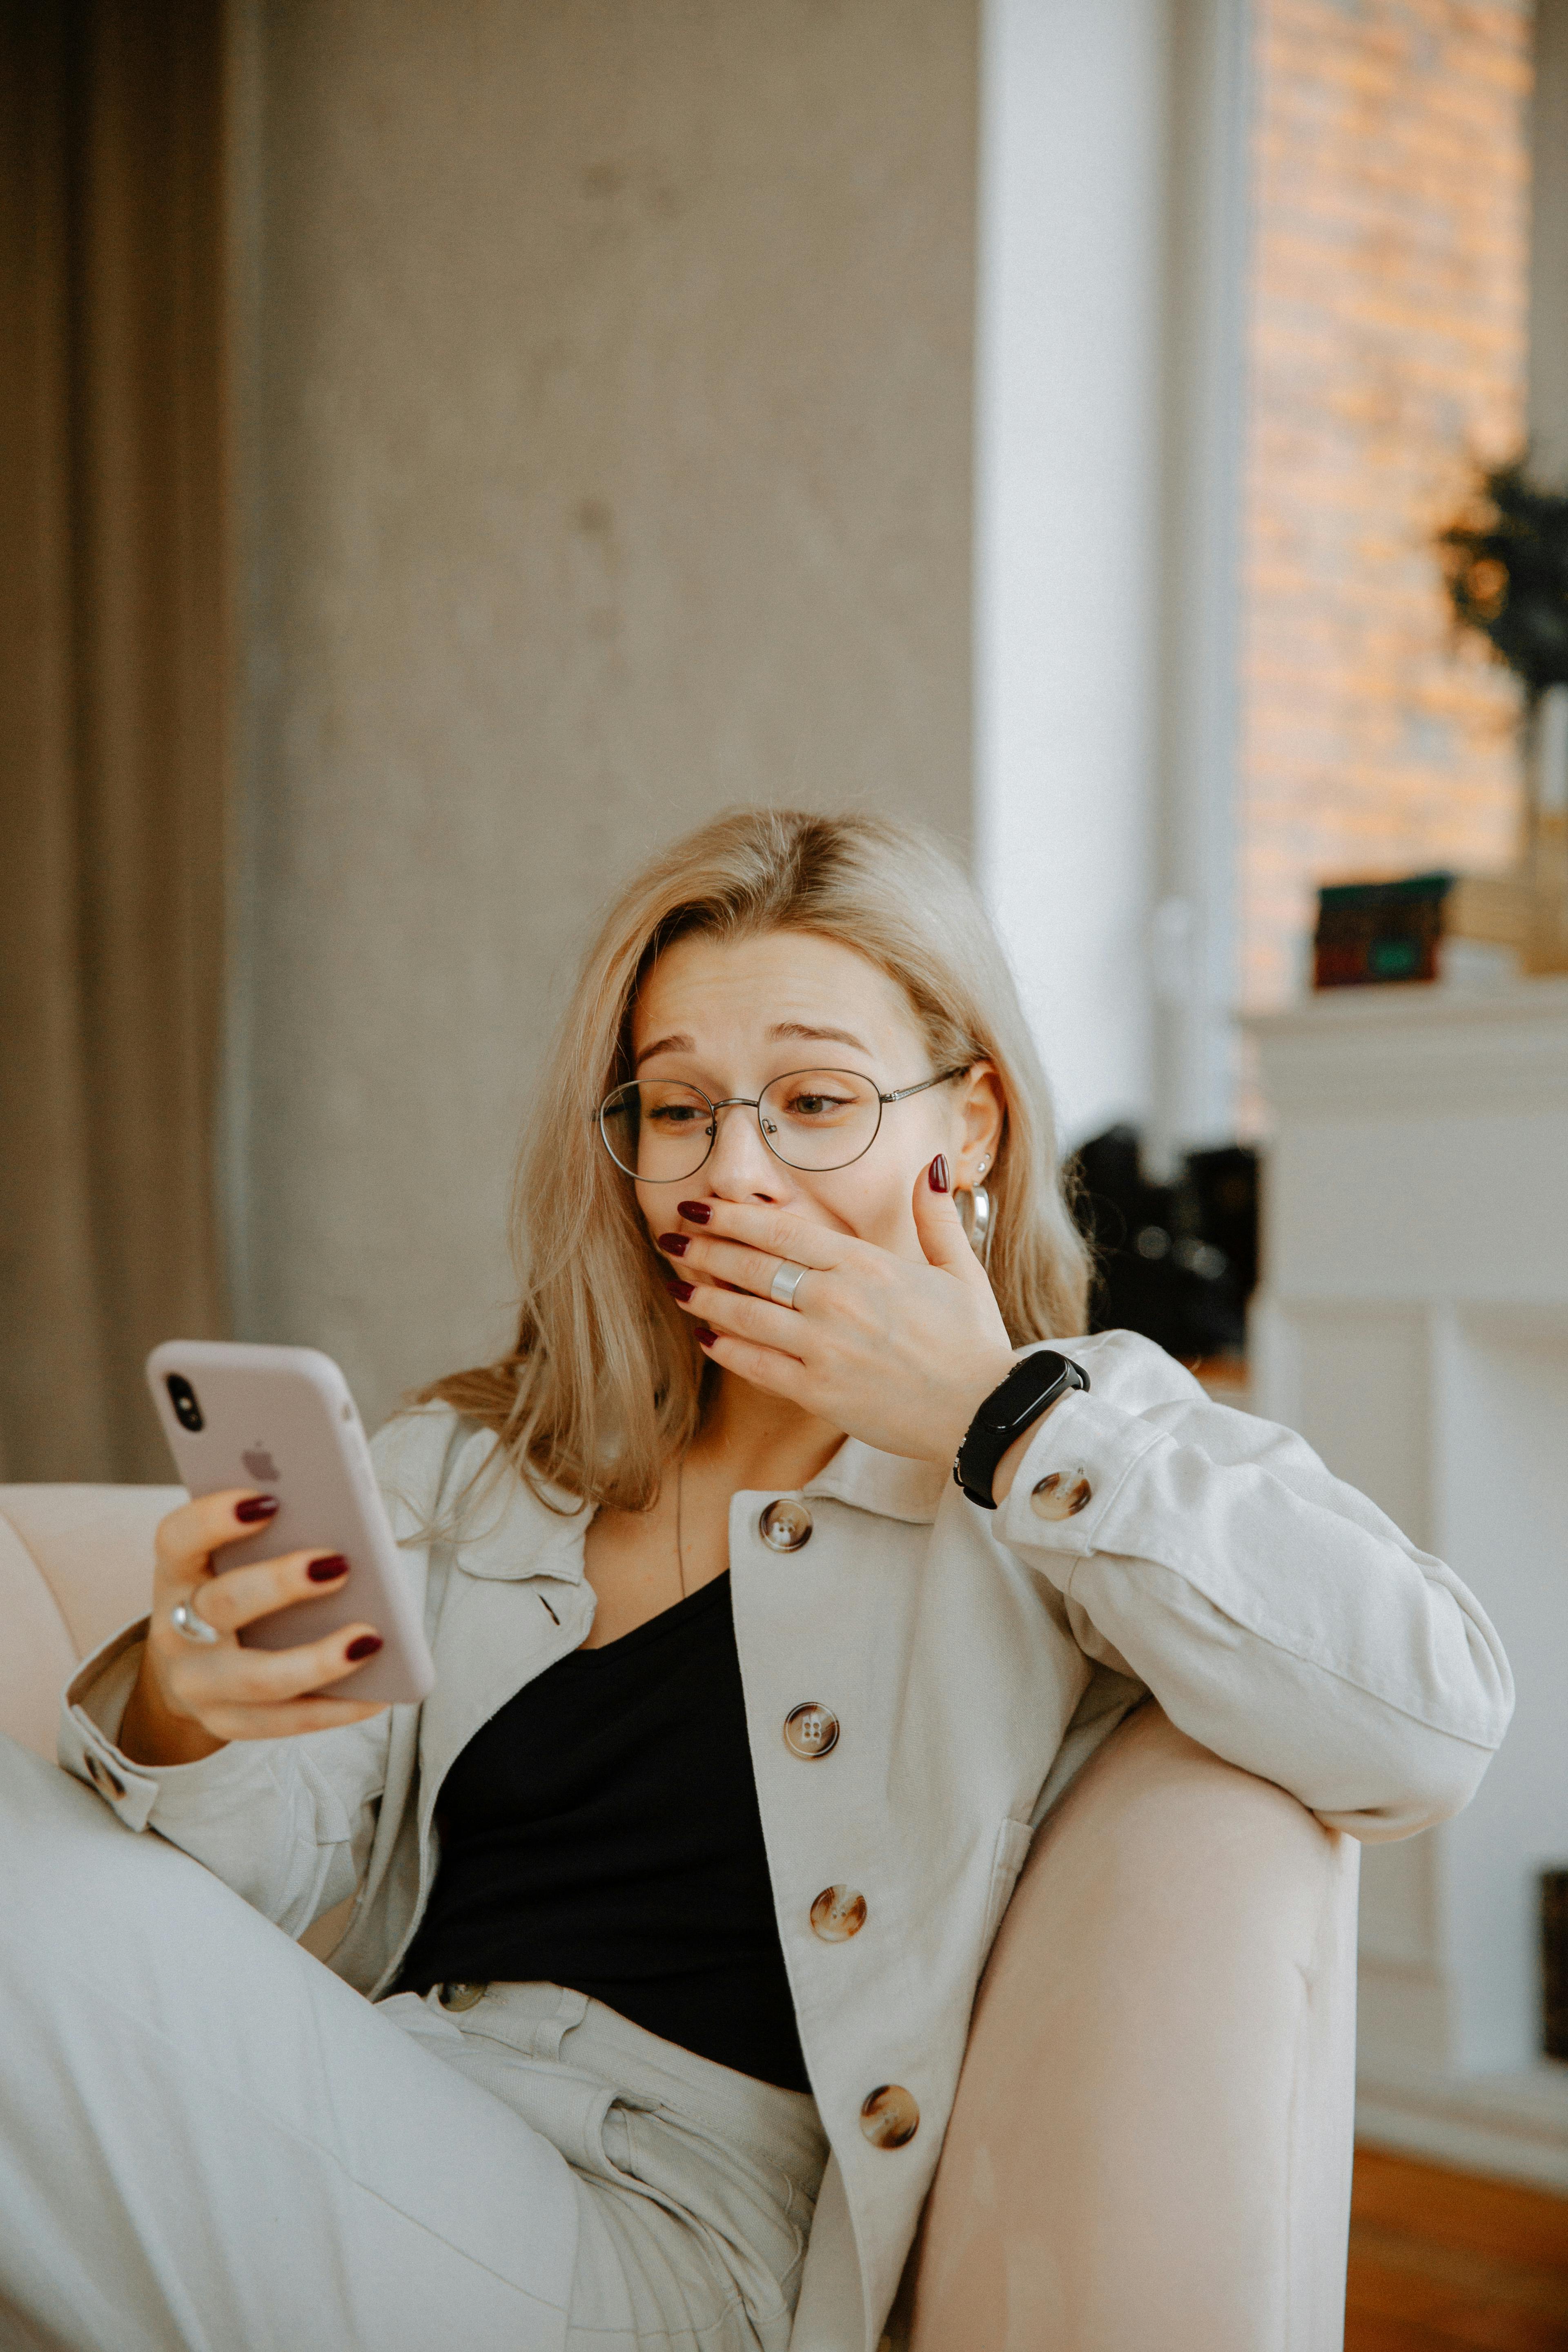 A woman covering her face while looking at her phone | Source: Pexels